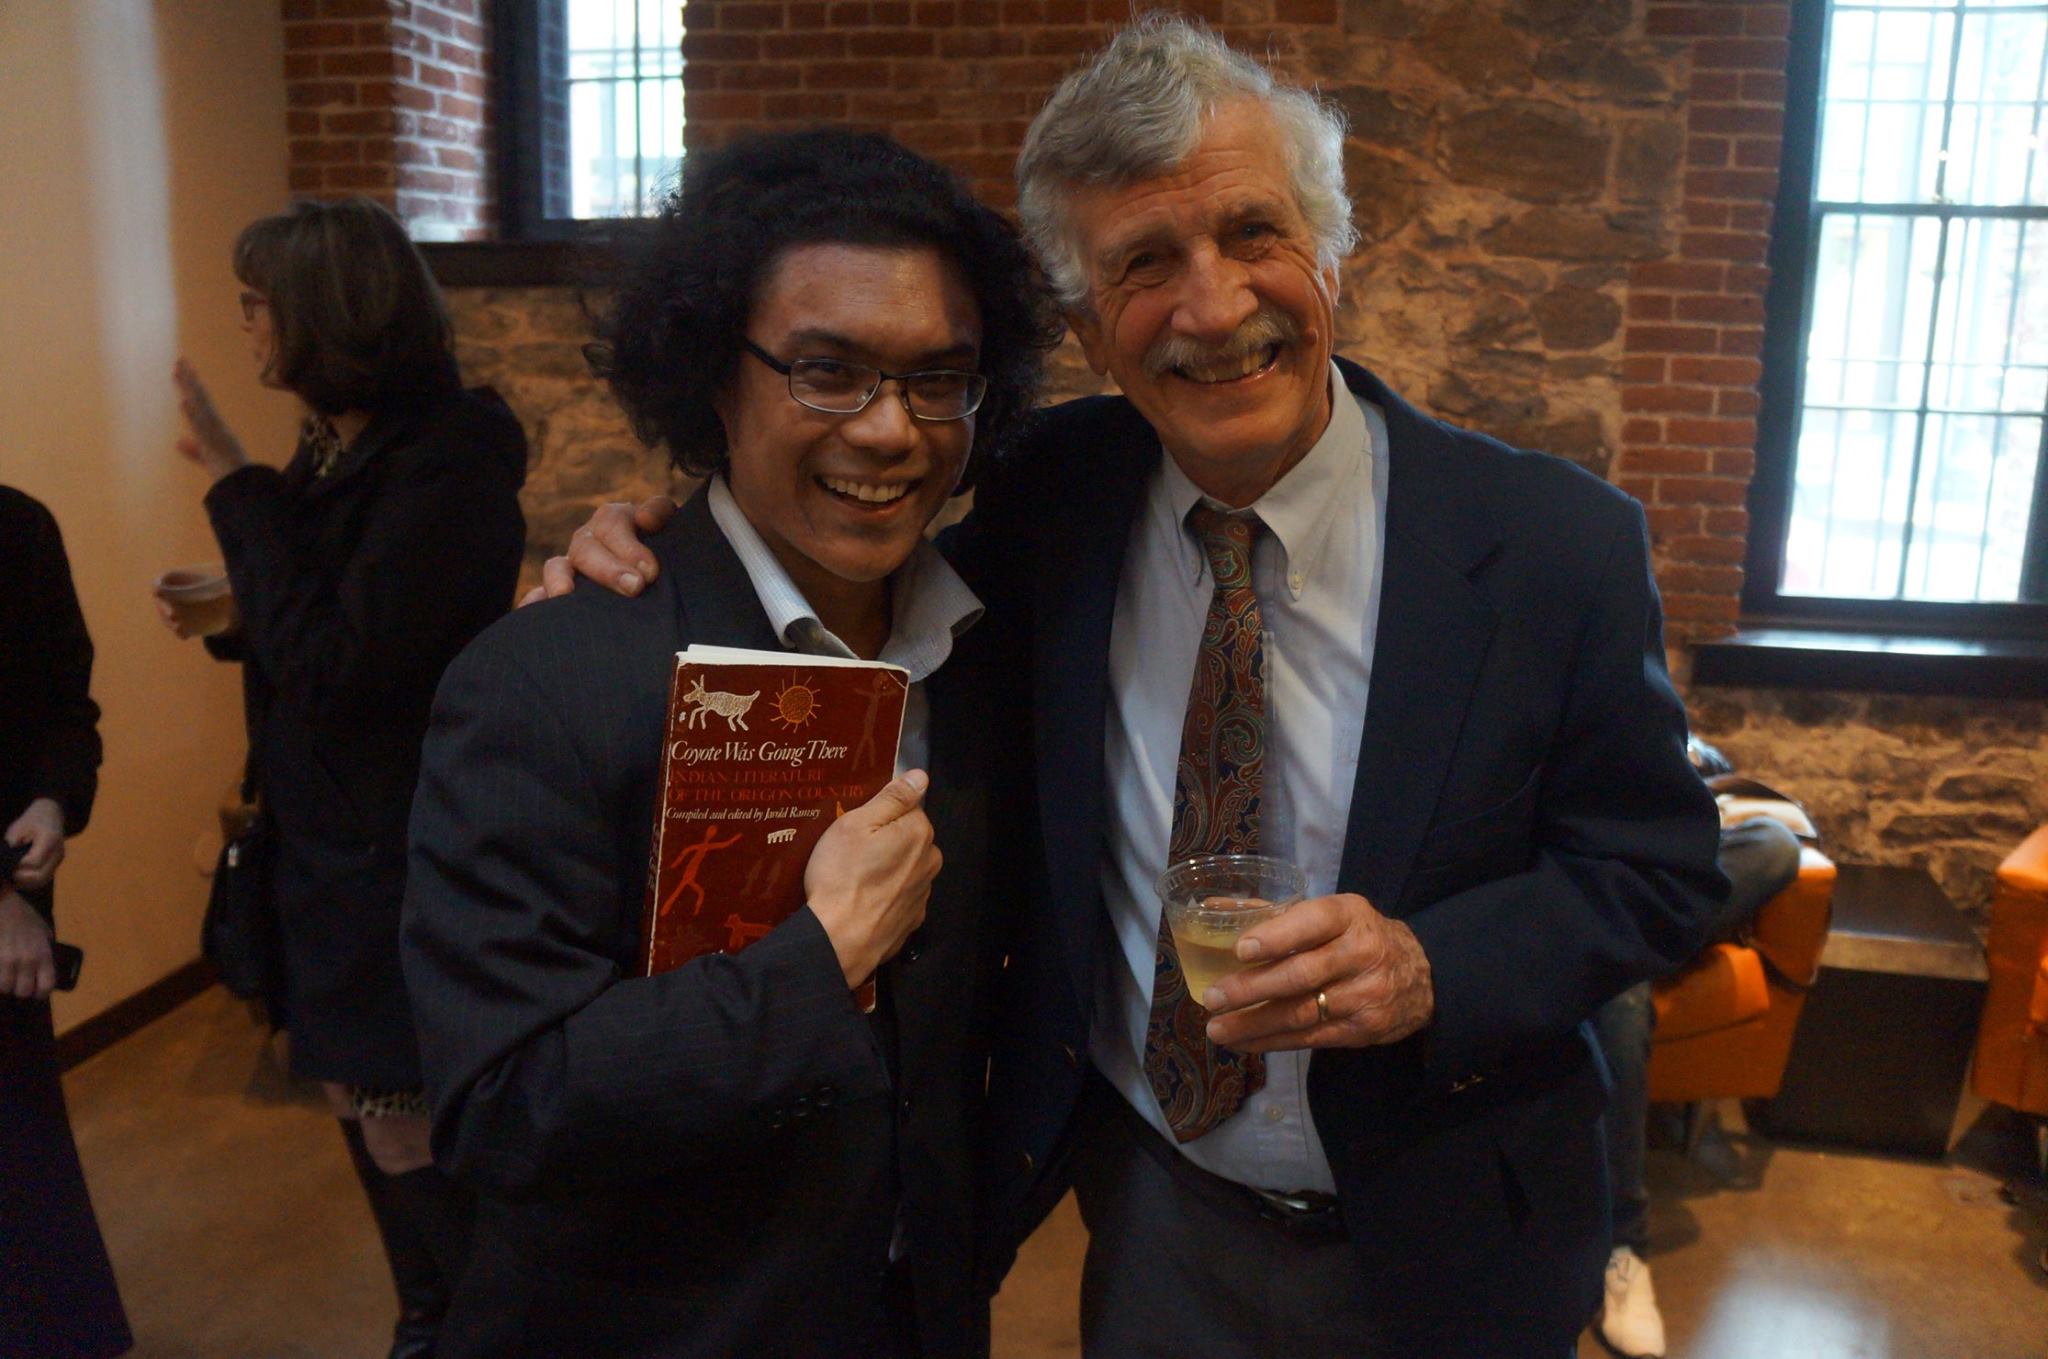 Armin Tolentino (left) with Jarold Ramsey. (Photograph: Laura Stanfill)